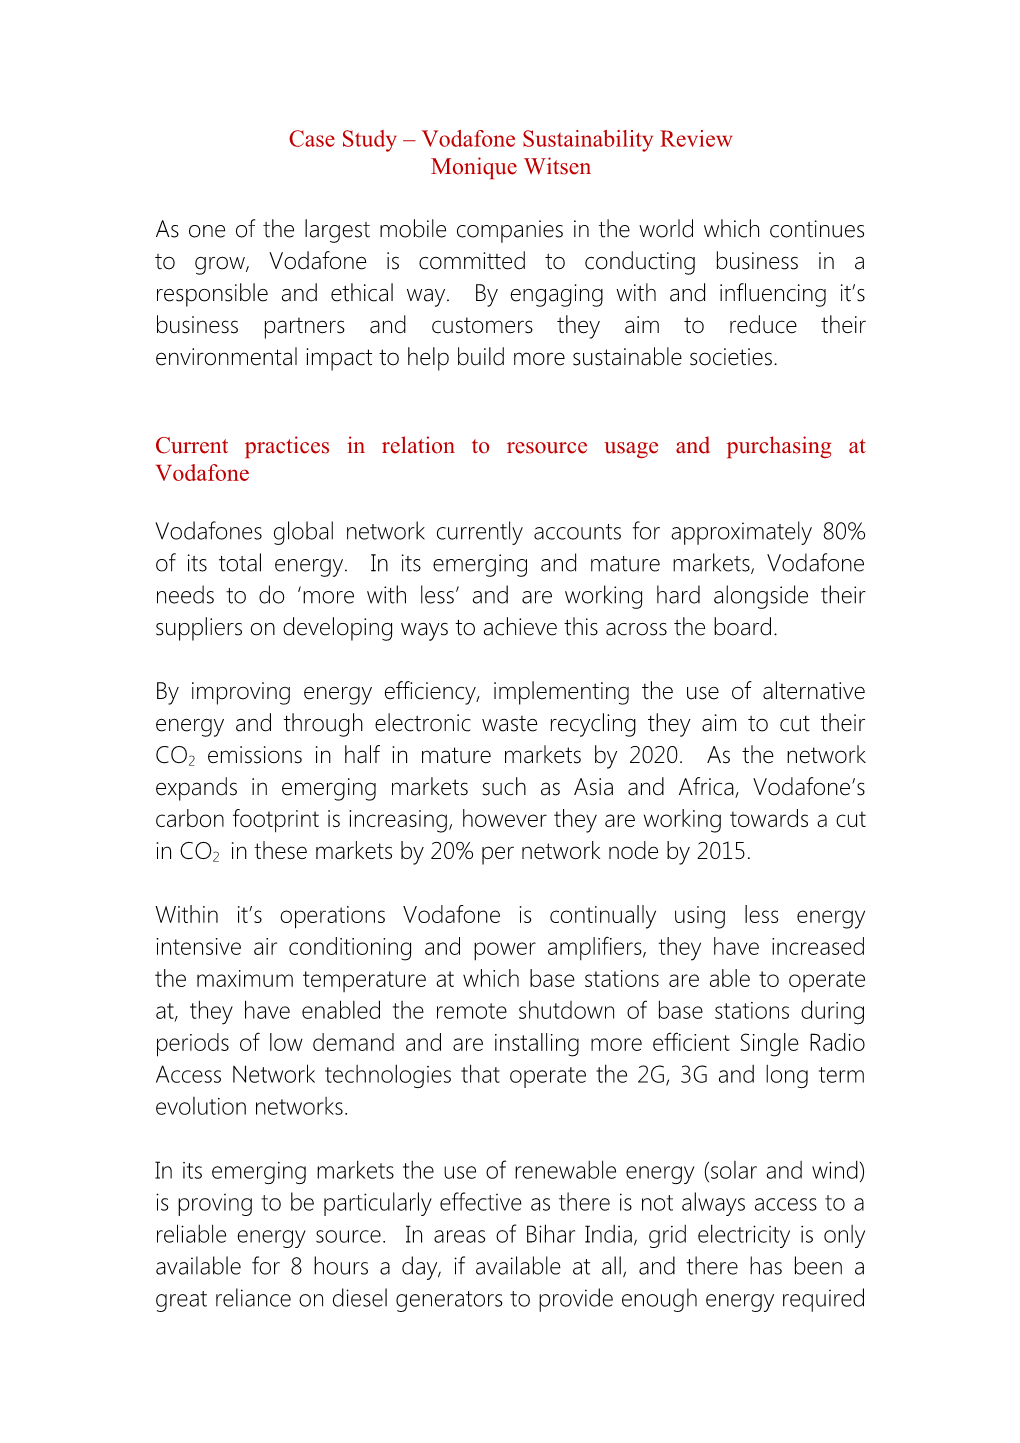 Case Study Vodafone Sustainability Review